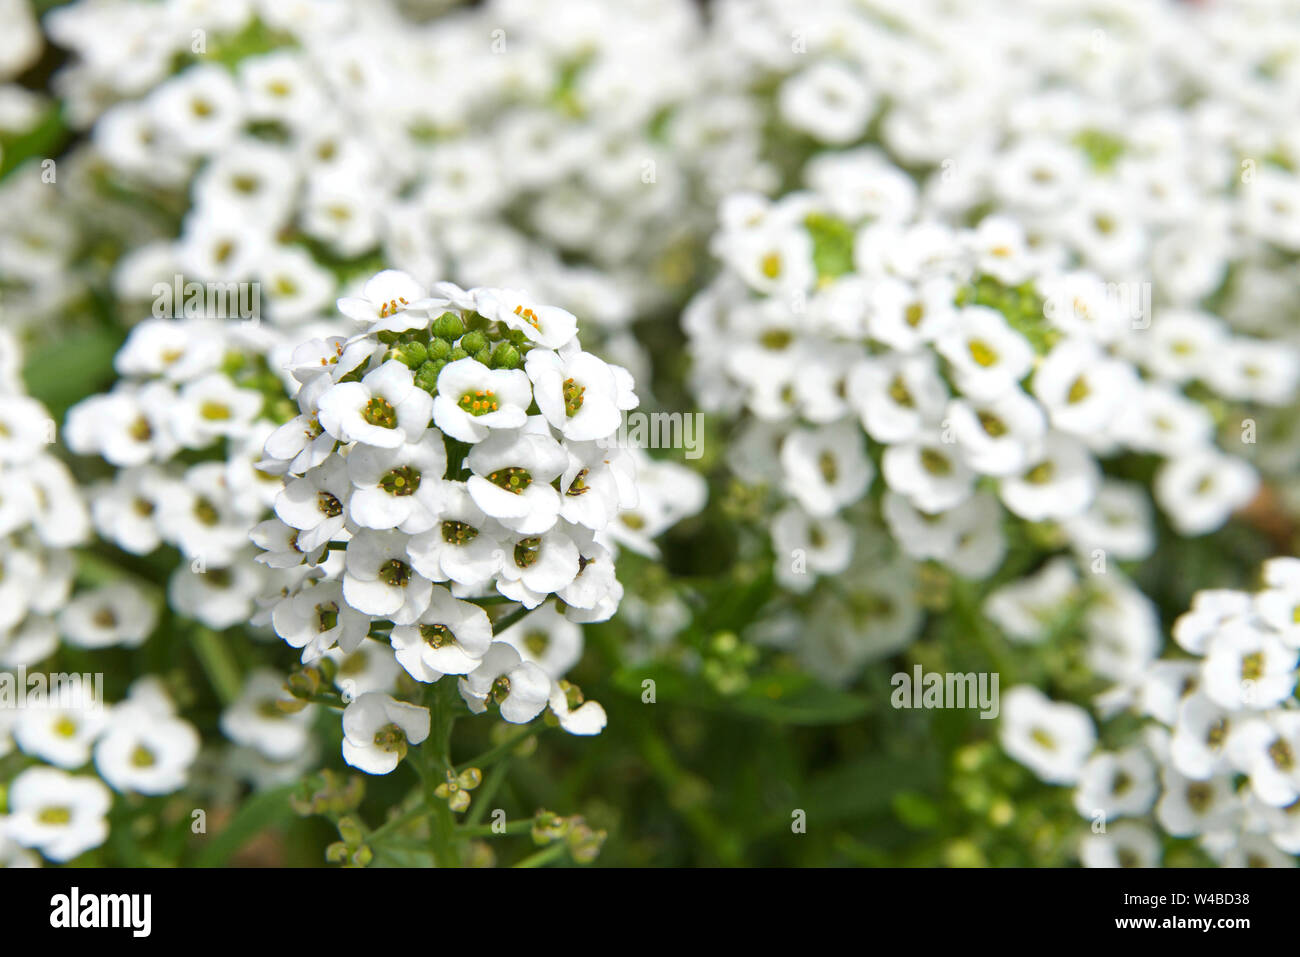 Alyssum flowers are characteristically small and grouped in terminal clusters they are often yellow or white colored but can be pink or purple. Stock Photo